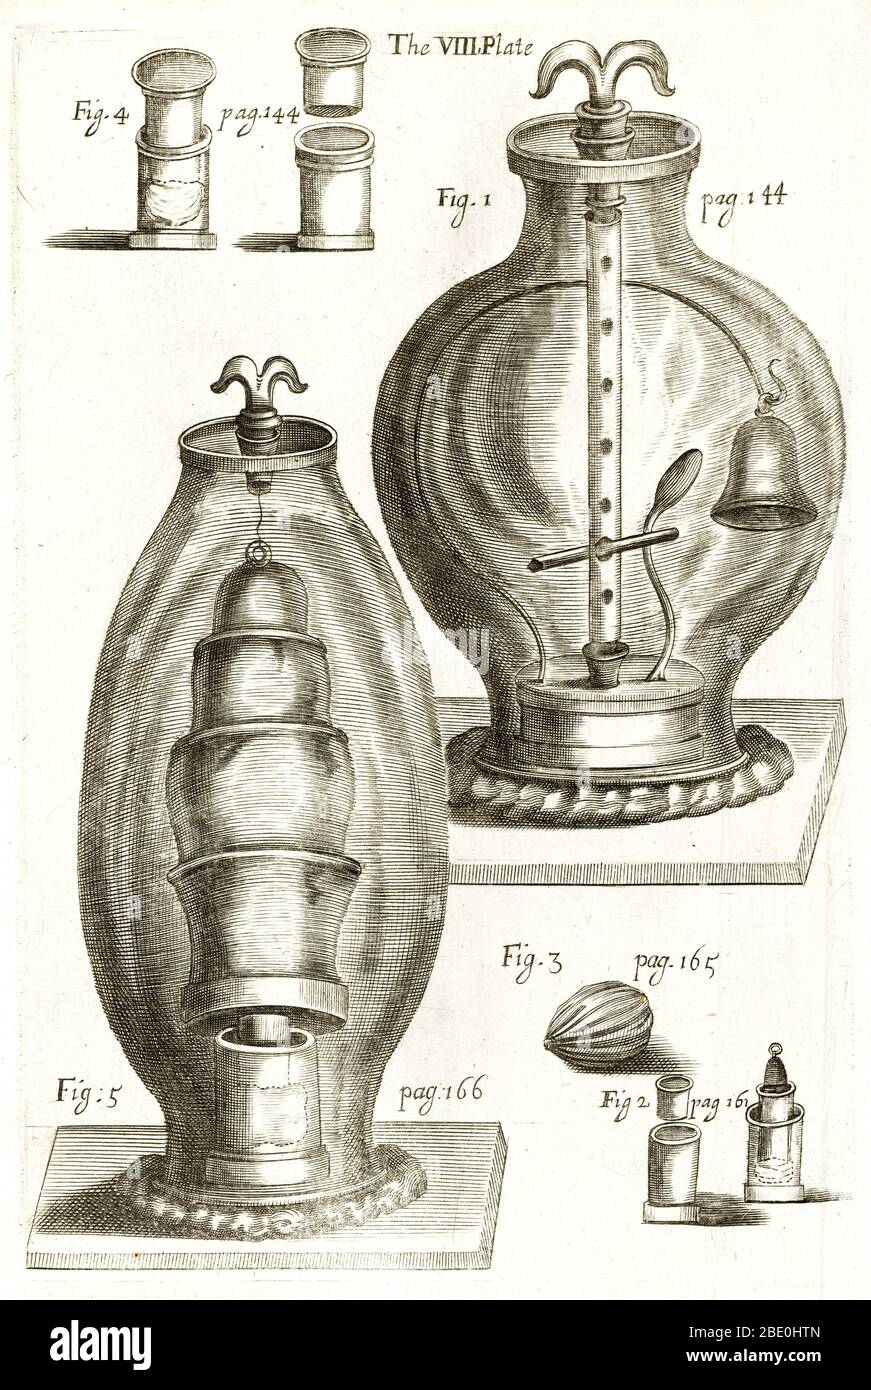 Boyle's experiments on air. Artwork of the apparatus for experiments on air carried out by the English natural philosopher Robert Boyle (1627-1691). At upper right, a bell is rung in a vacuum. This artwork is from Boyle's work A Continuation of New Experiments Physico-Mechanical, Touching the Spring and Weight of the Air, and their Effects (1669). This was a continuation of an earlier work of 1660, and was followed by a second part in 1682. In these works, Boyle described his experiments on air, including the gas law named for him. He also investigated the effect of a vacuum on sound, magnetic Stock Photo